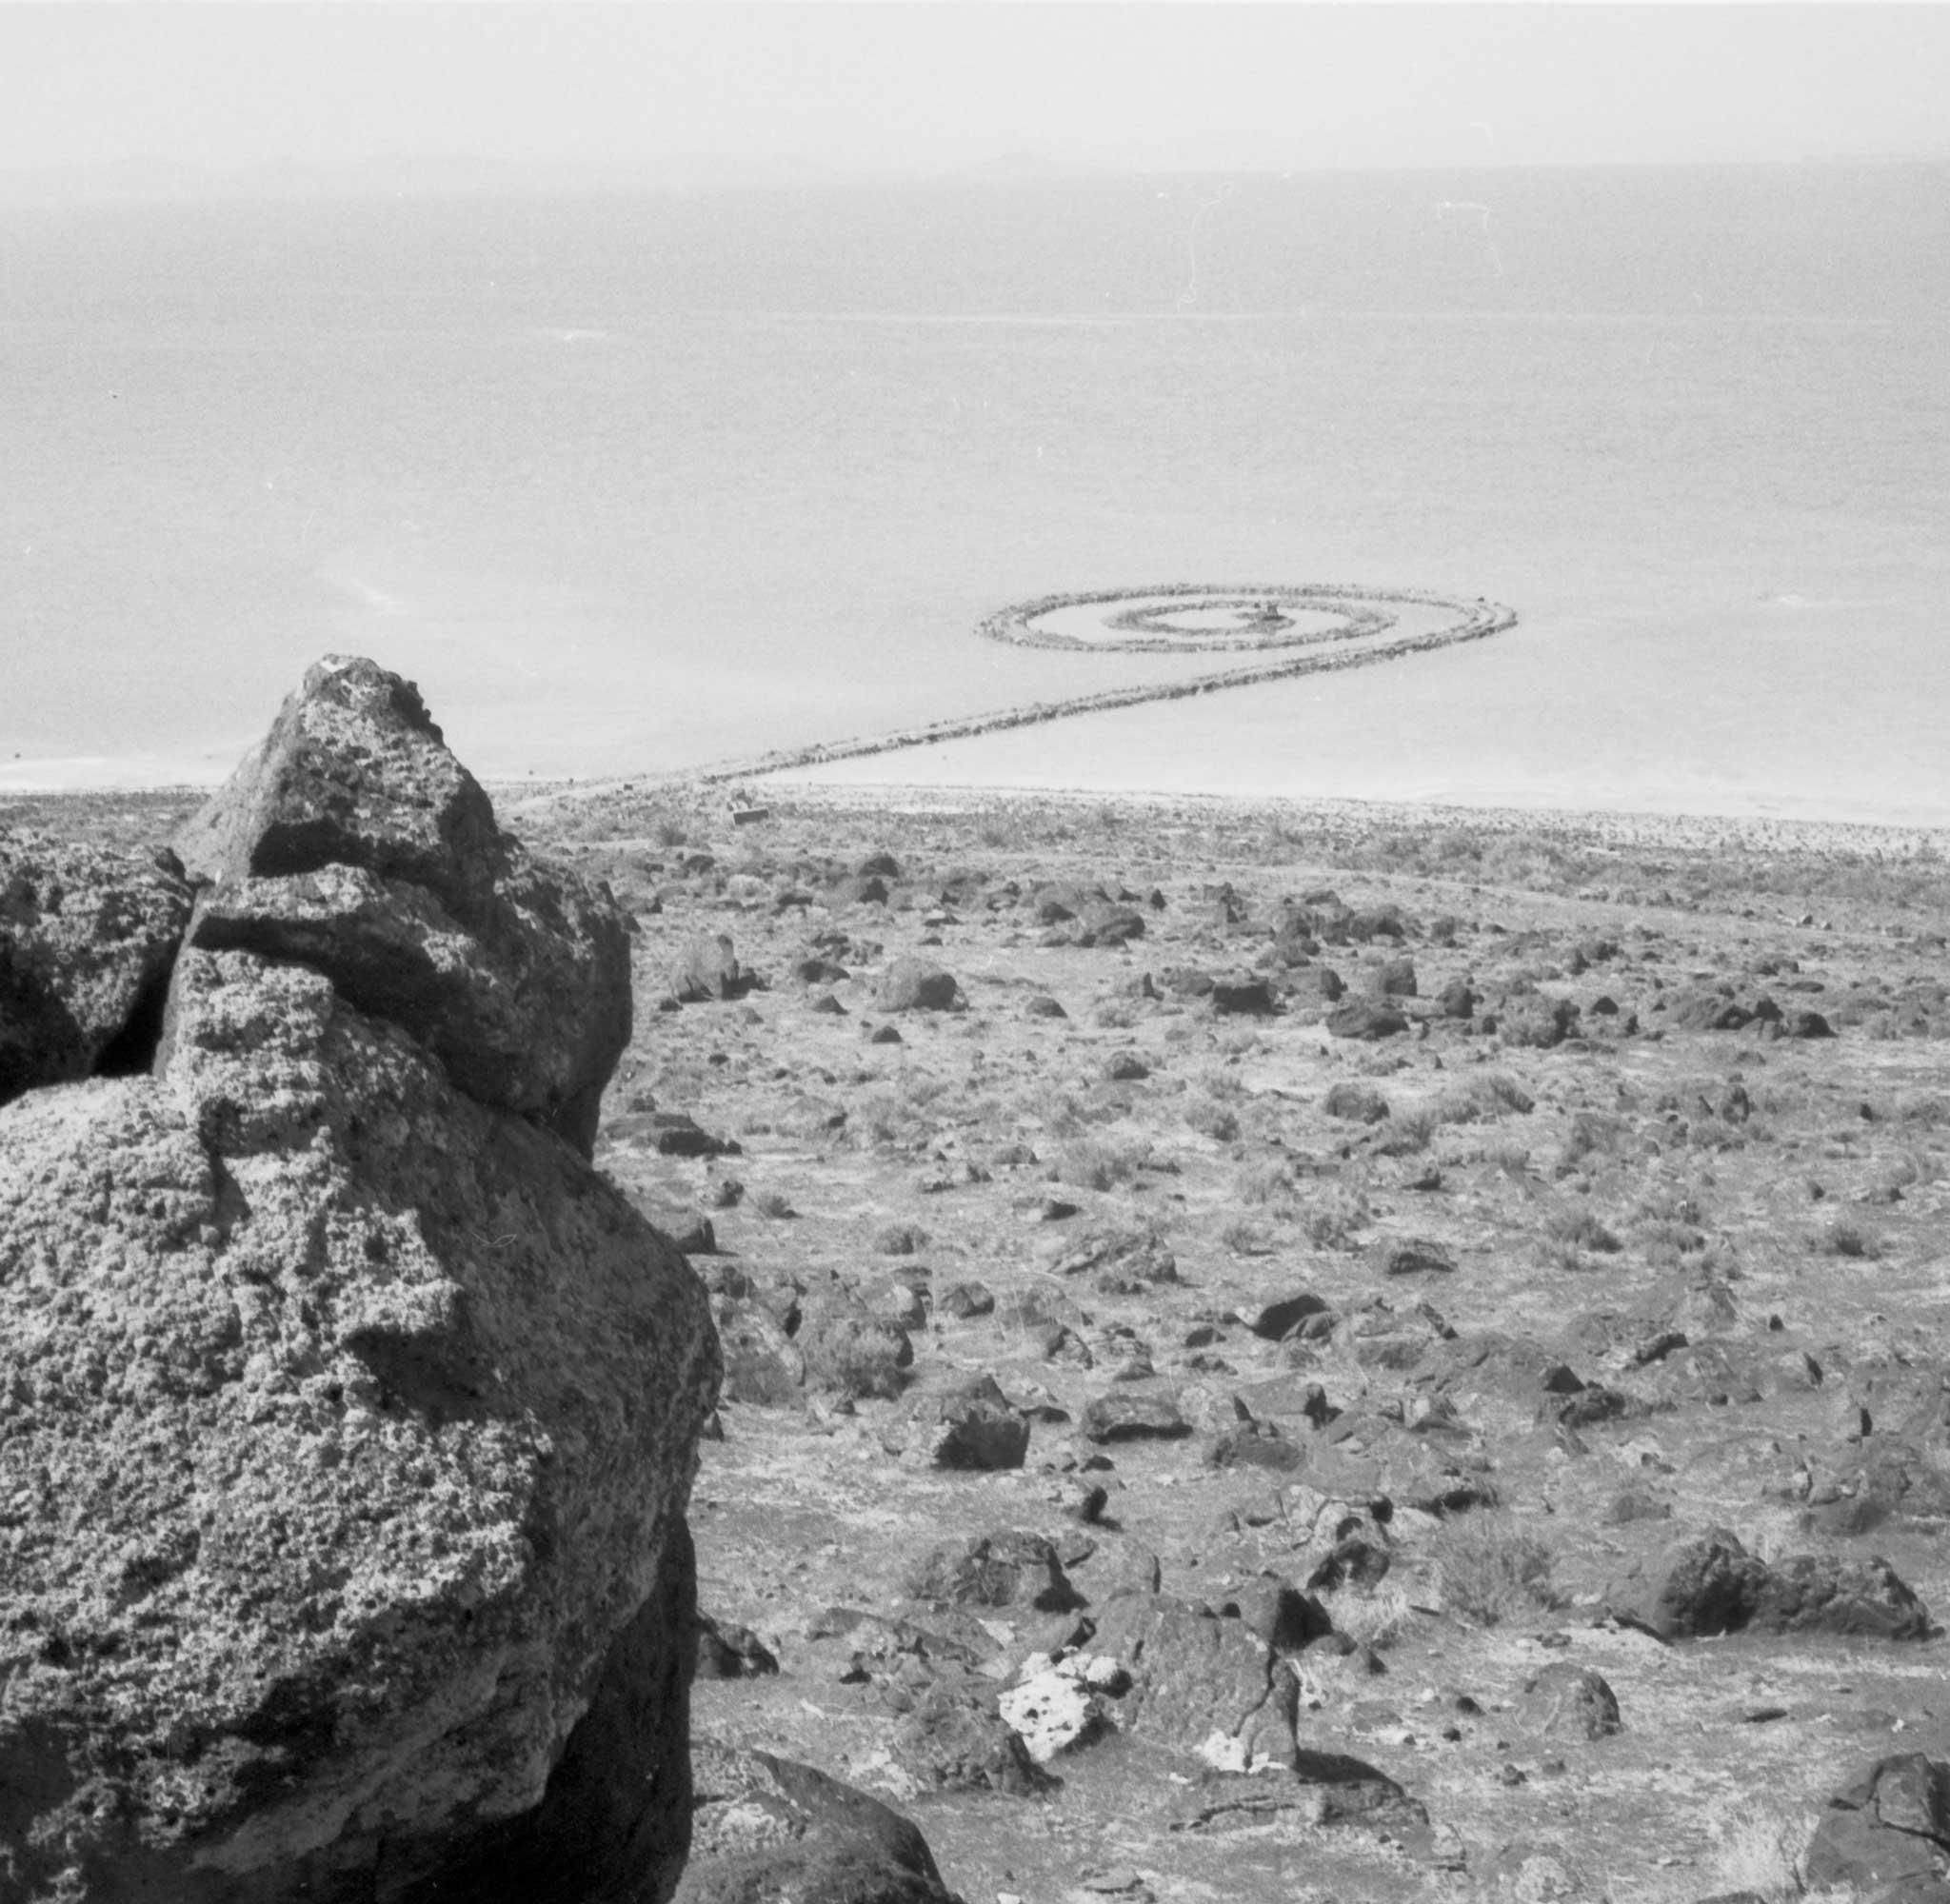 black and white image showing a spiraling jetty of rock extending out into a lake, with the shoreline and rocks in the foreground